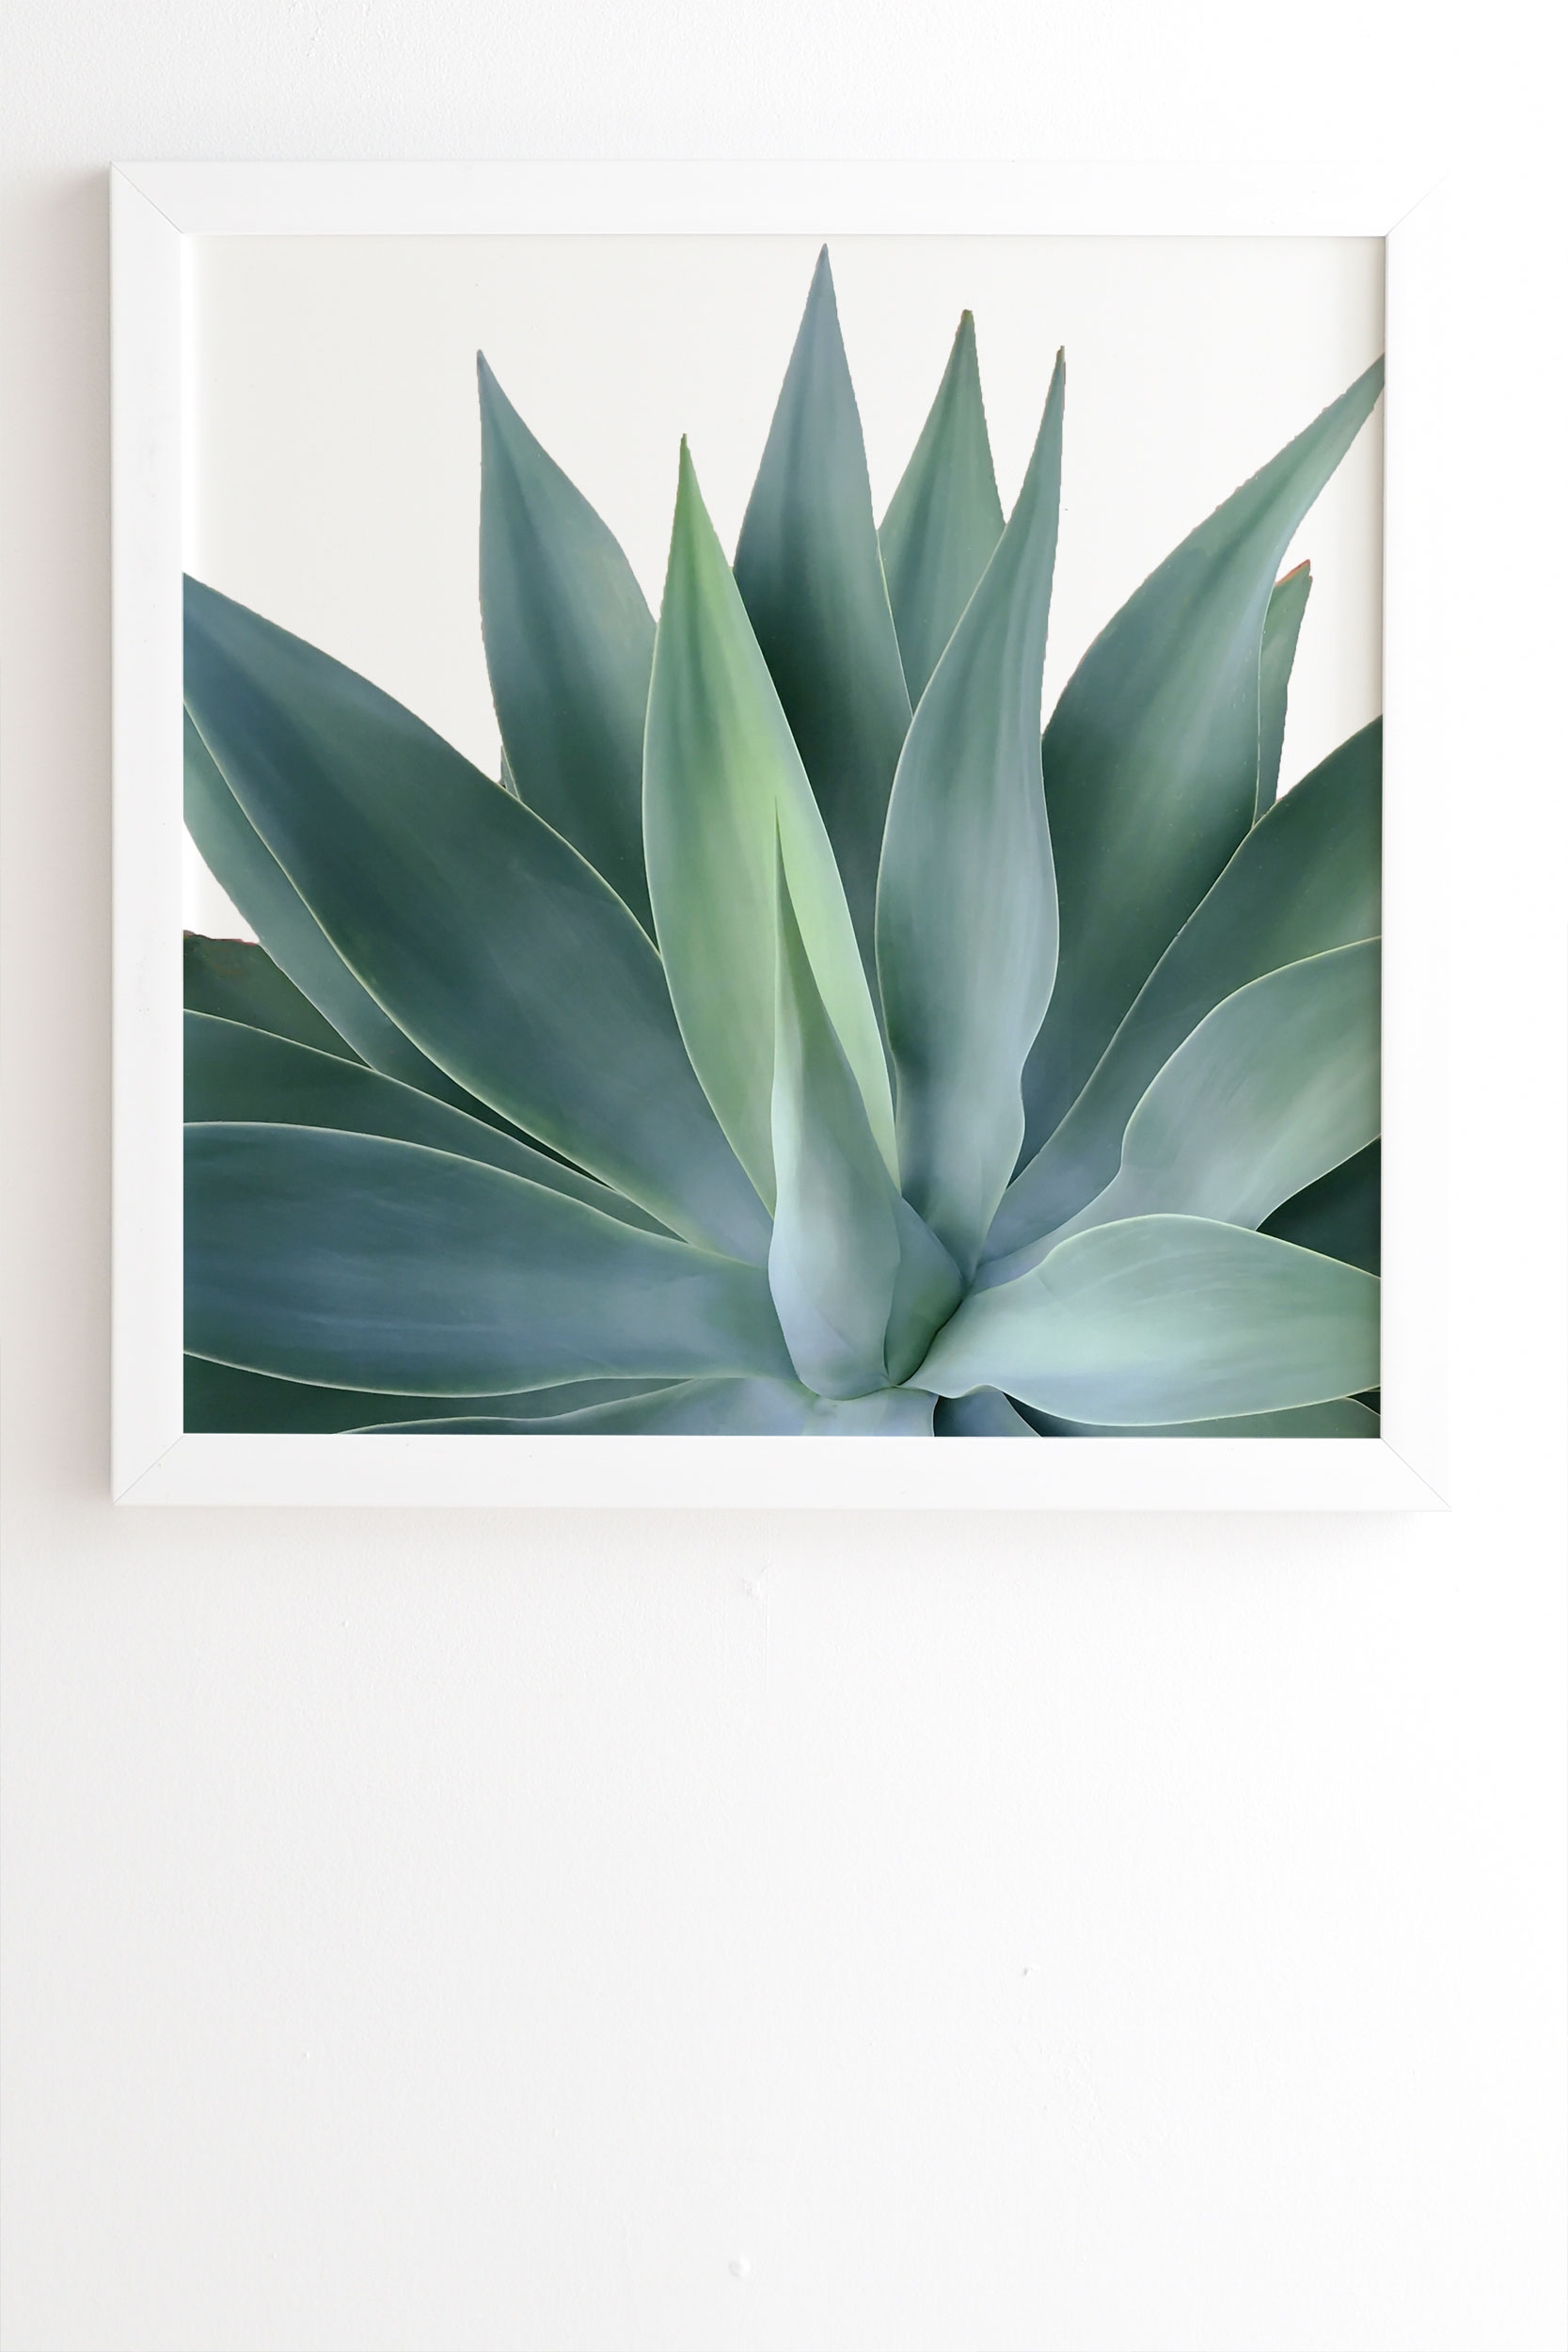 Agave Blanco by Gale Switzer - Framed Wall Art Basic White 19" x 22.4" - Image 1